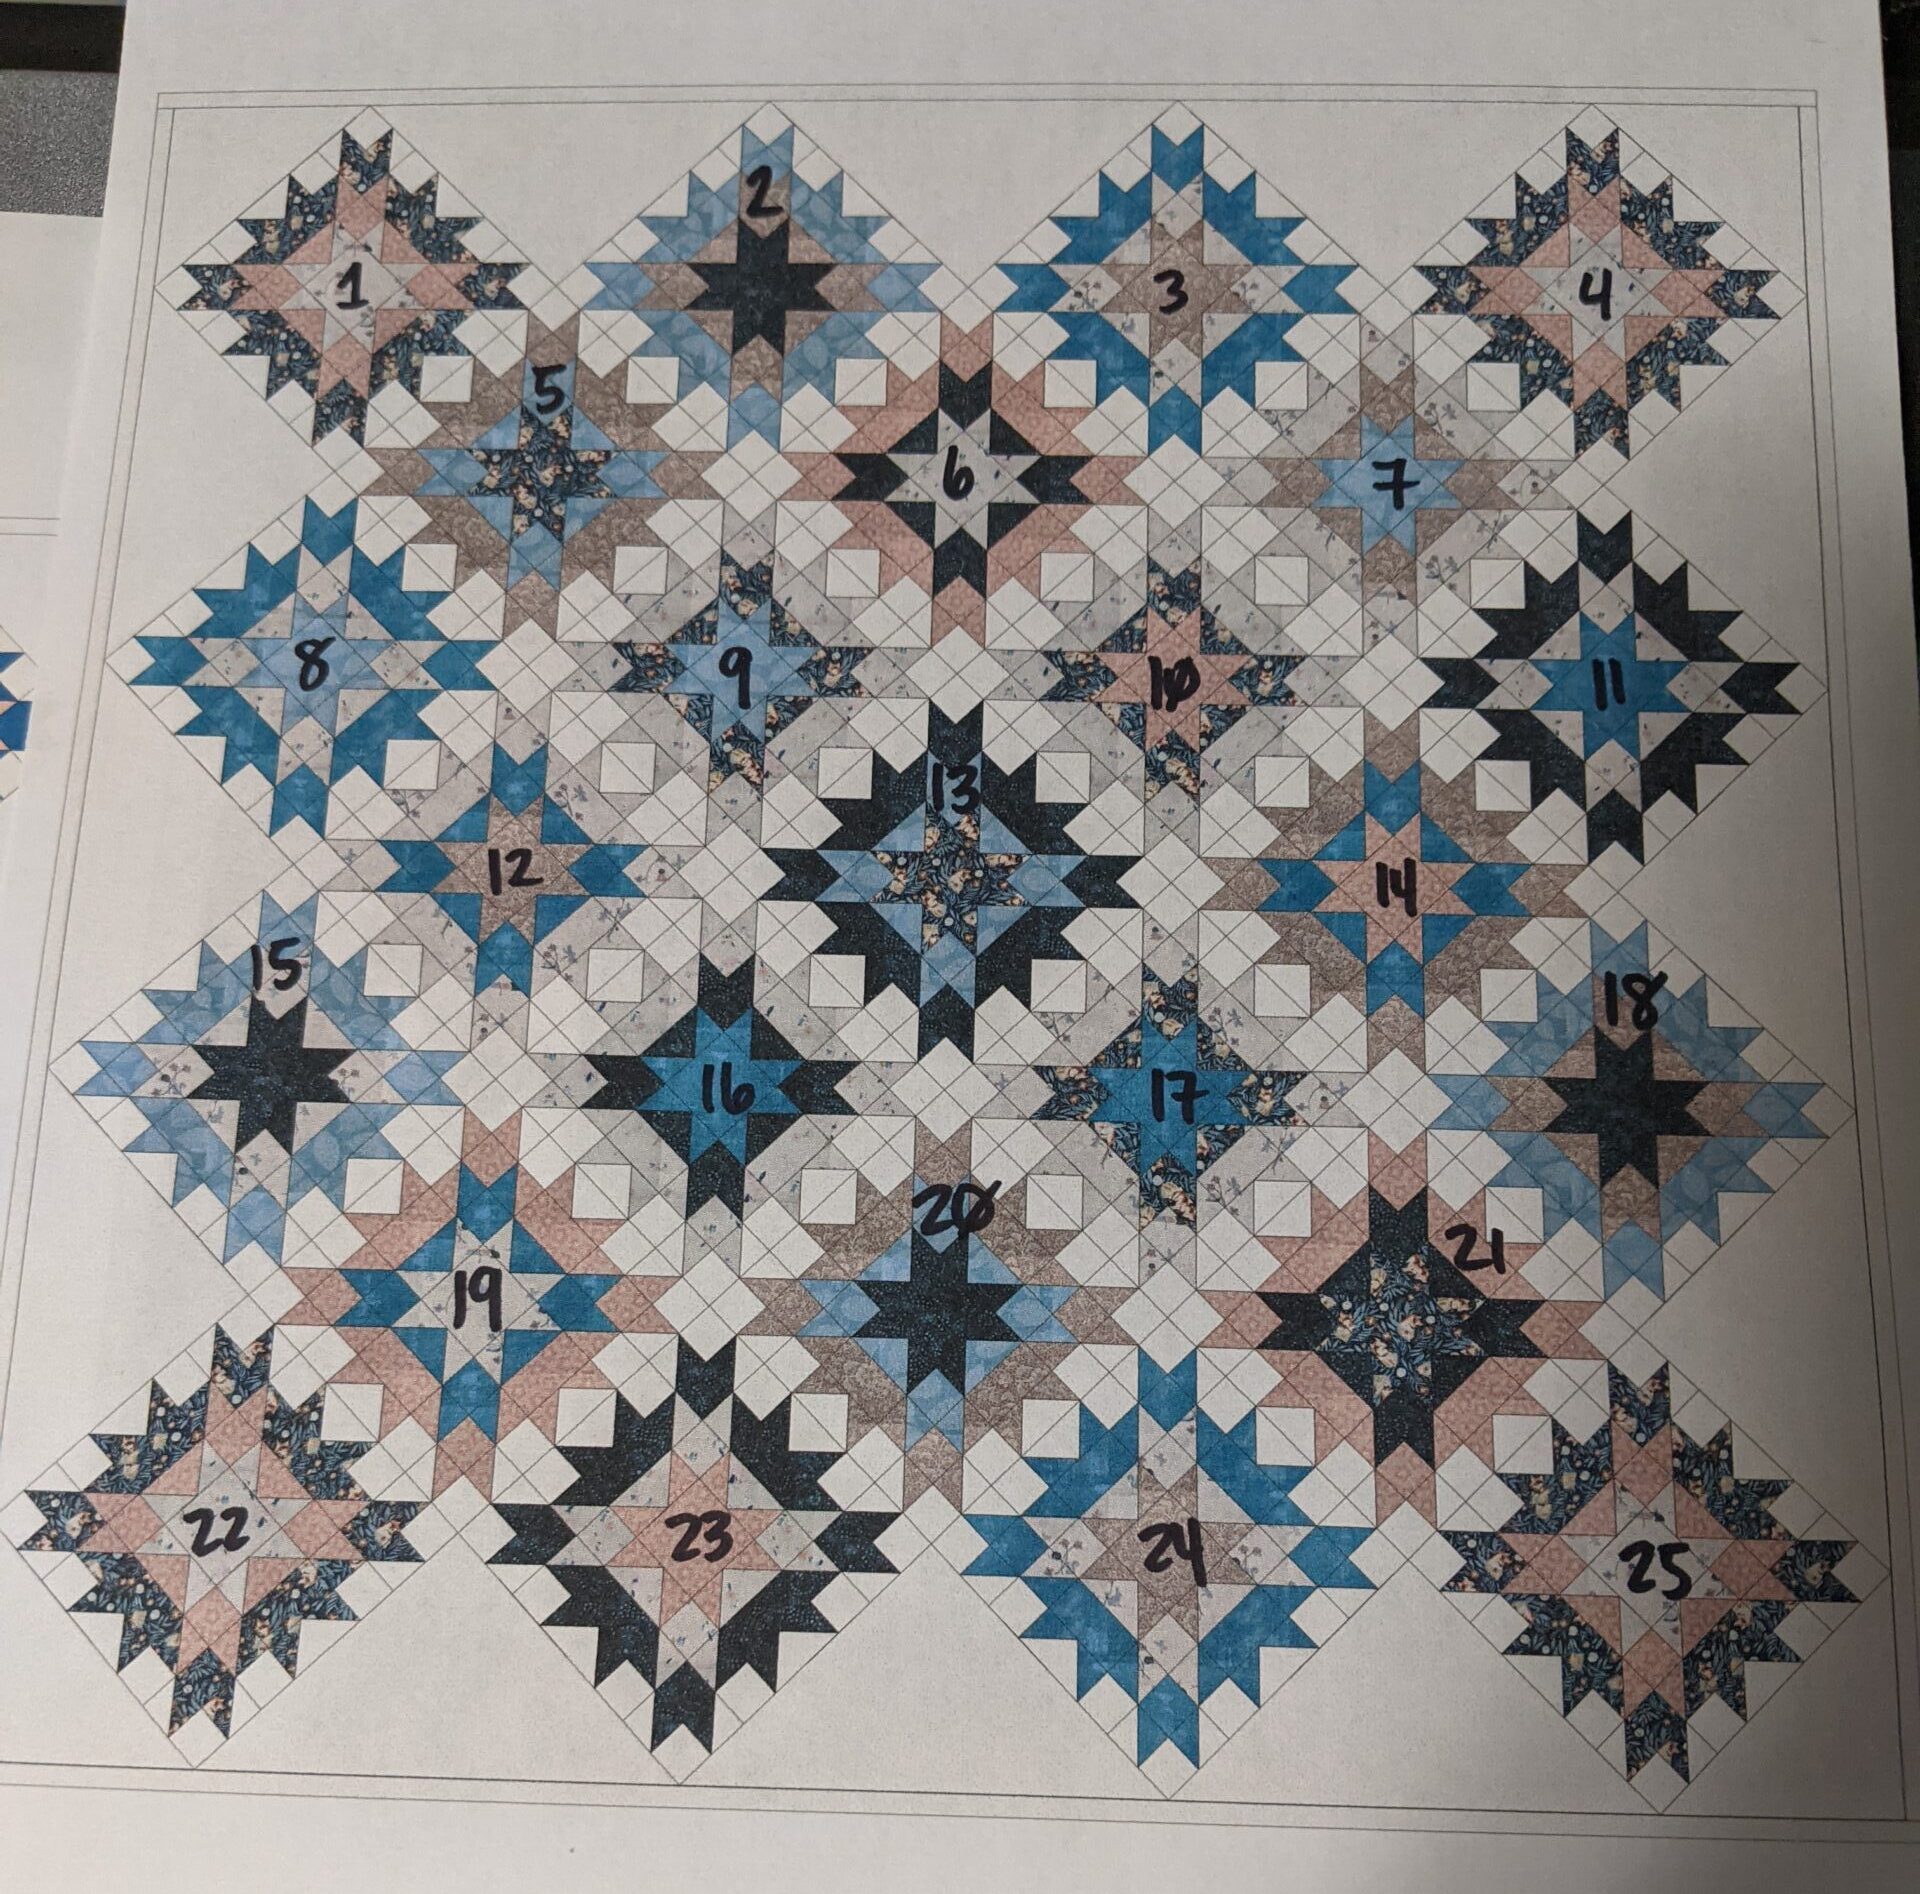 With Every Stitch a Story: An Entire Quilt From Start to Finish, Part 6: Assembling the Quilt Top